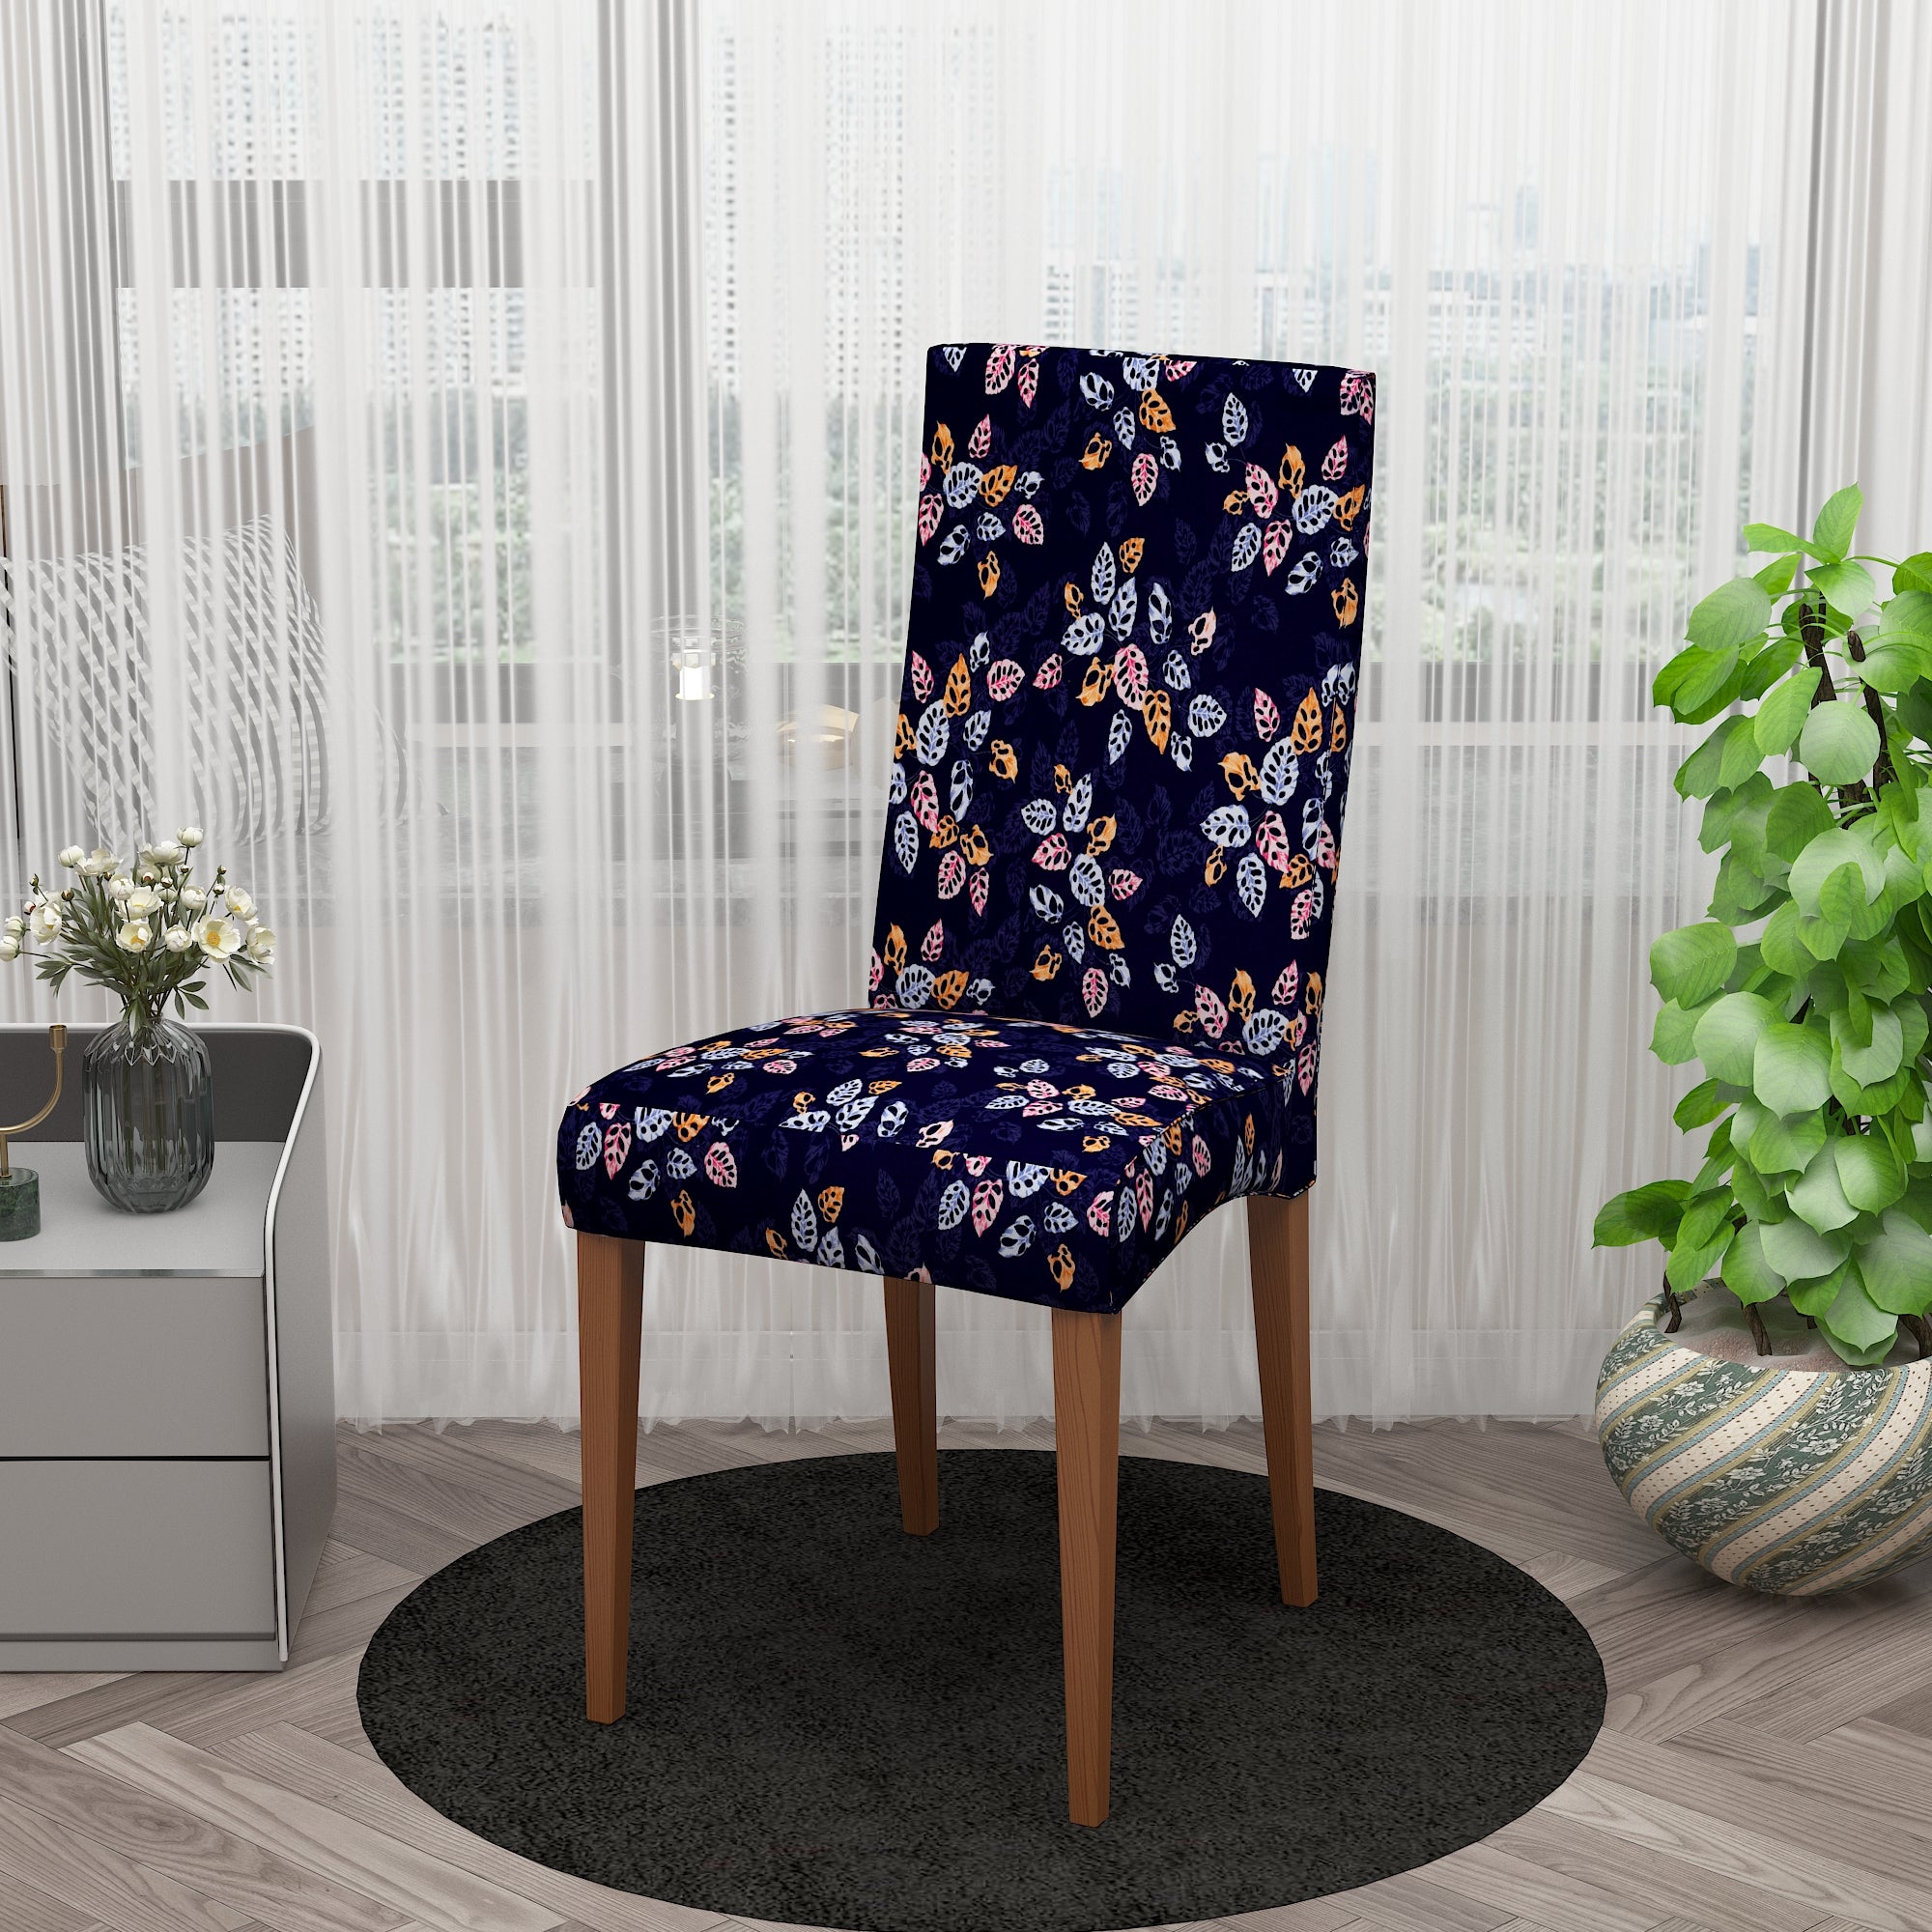 Polyester Spandex Stretchable Printed Chair Cover, MG01